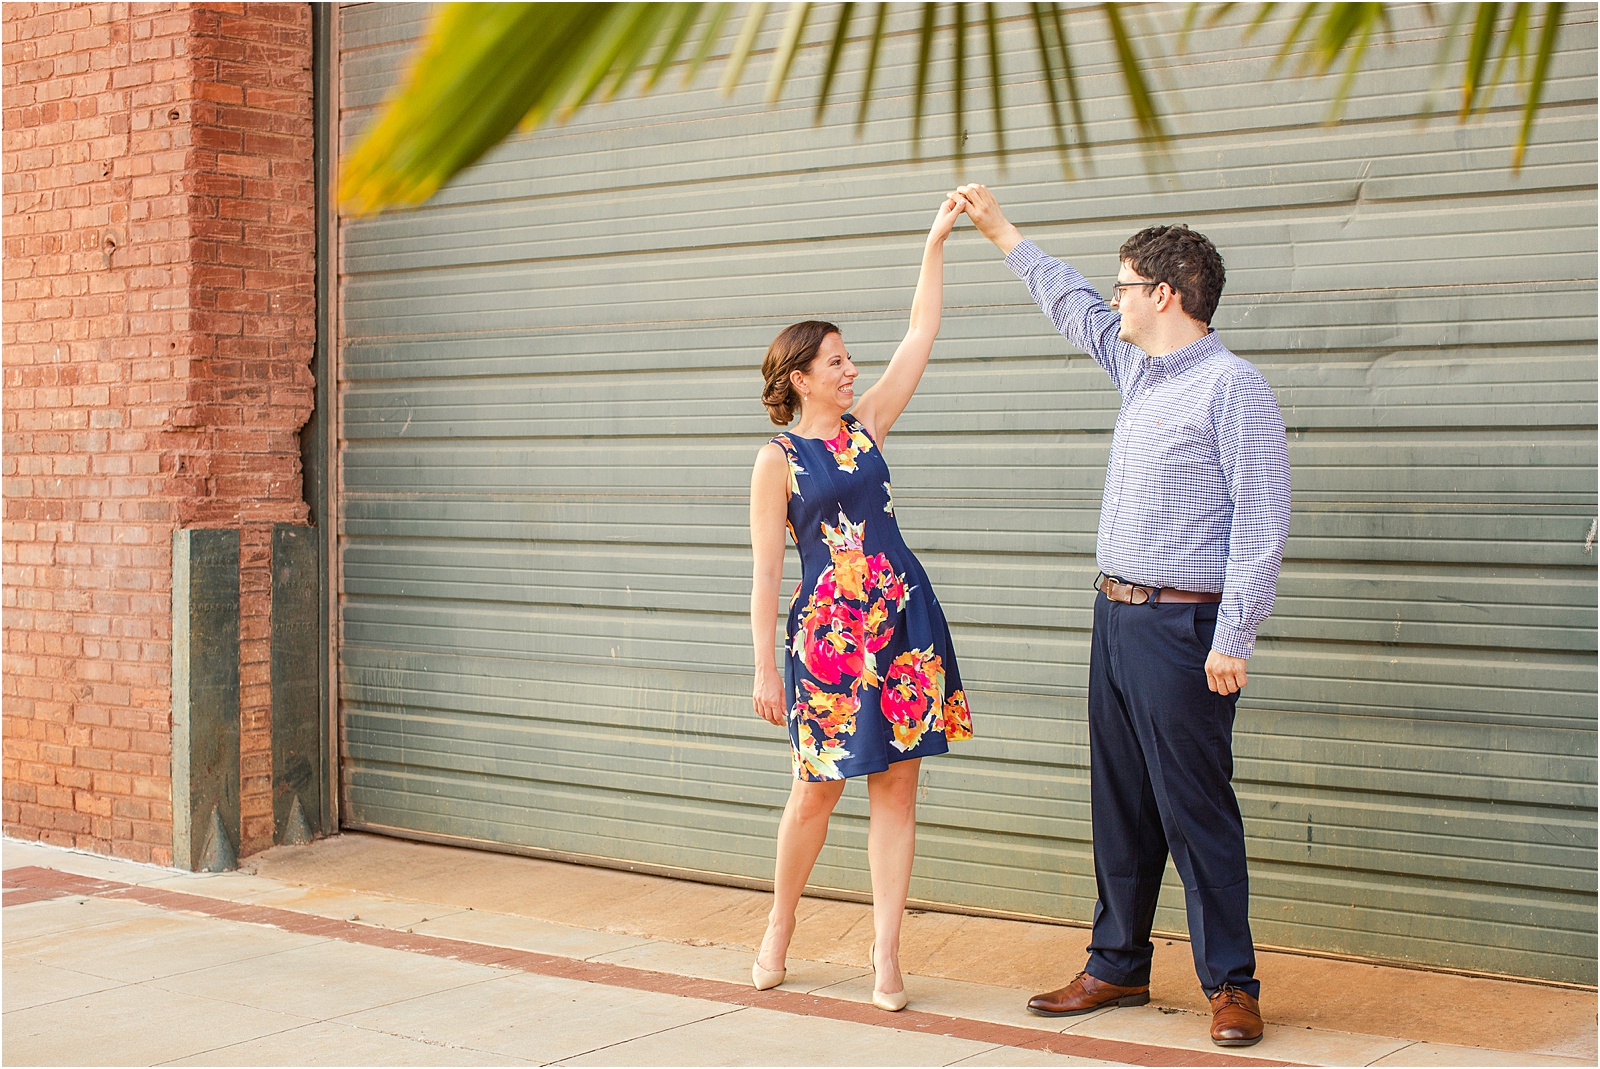 Happy engaged couple dancing next to brick building